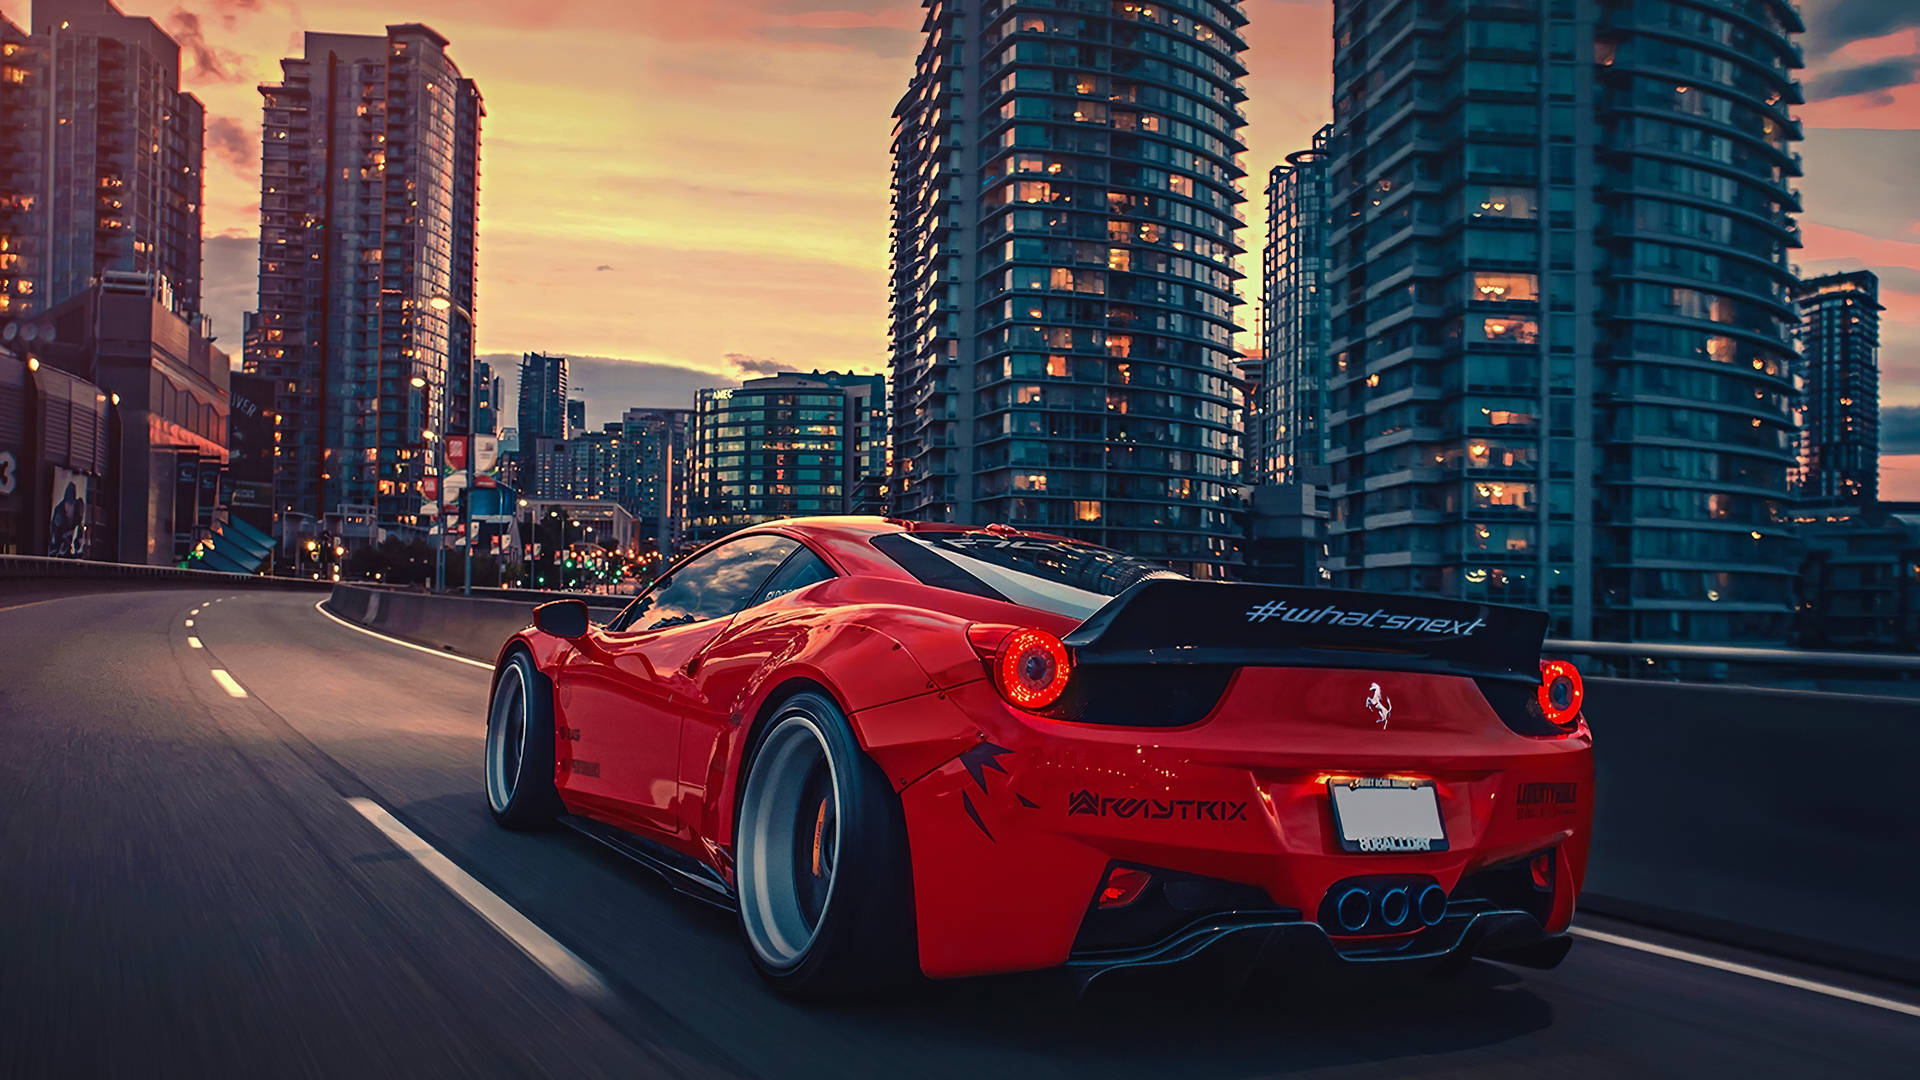 Get Ready to Race in This Chrome Ferrari Wallpaper